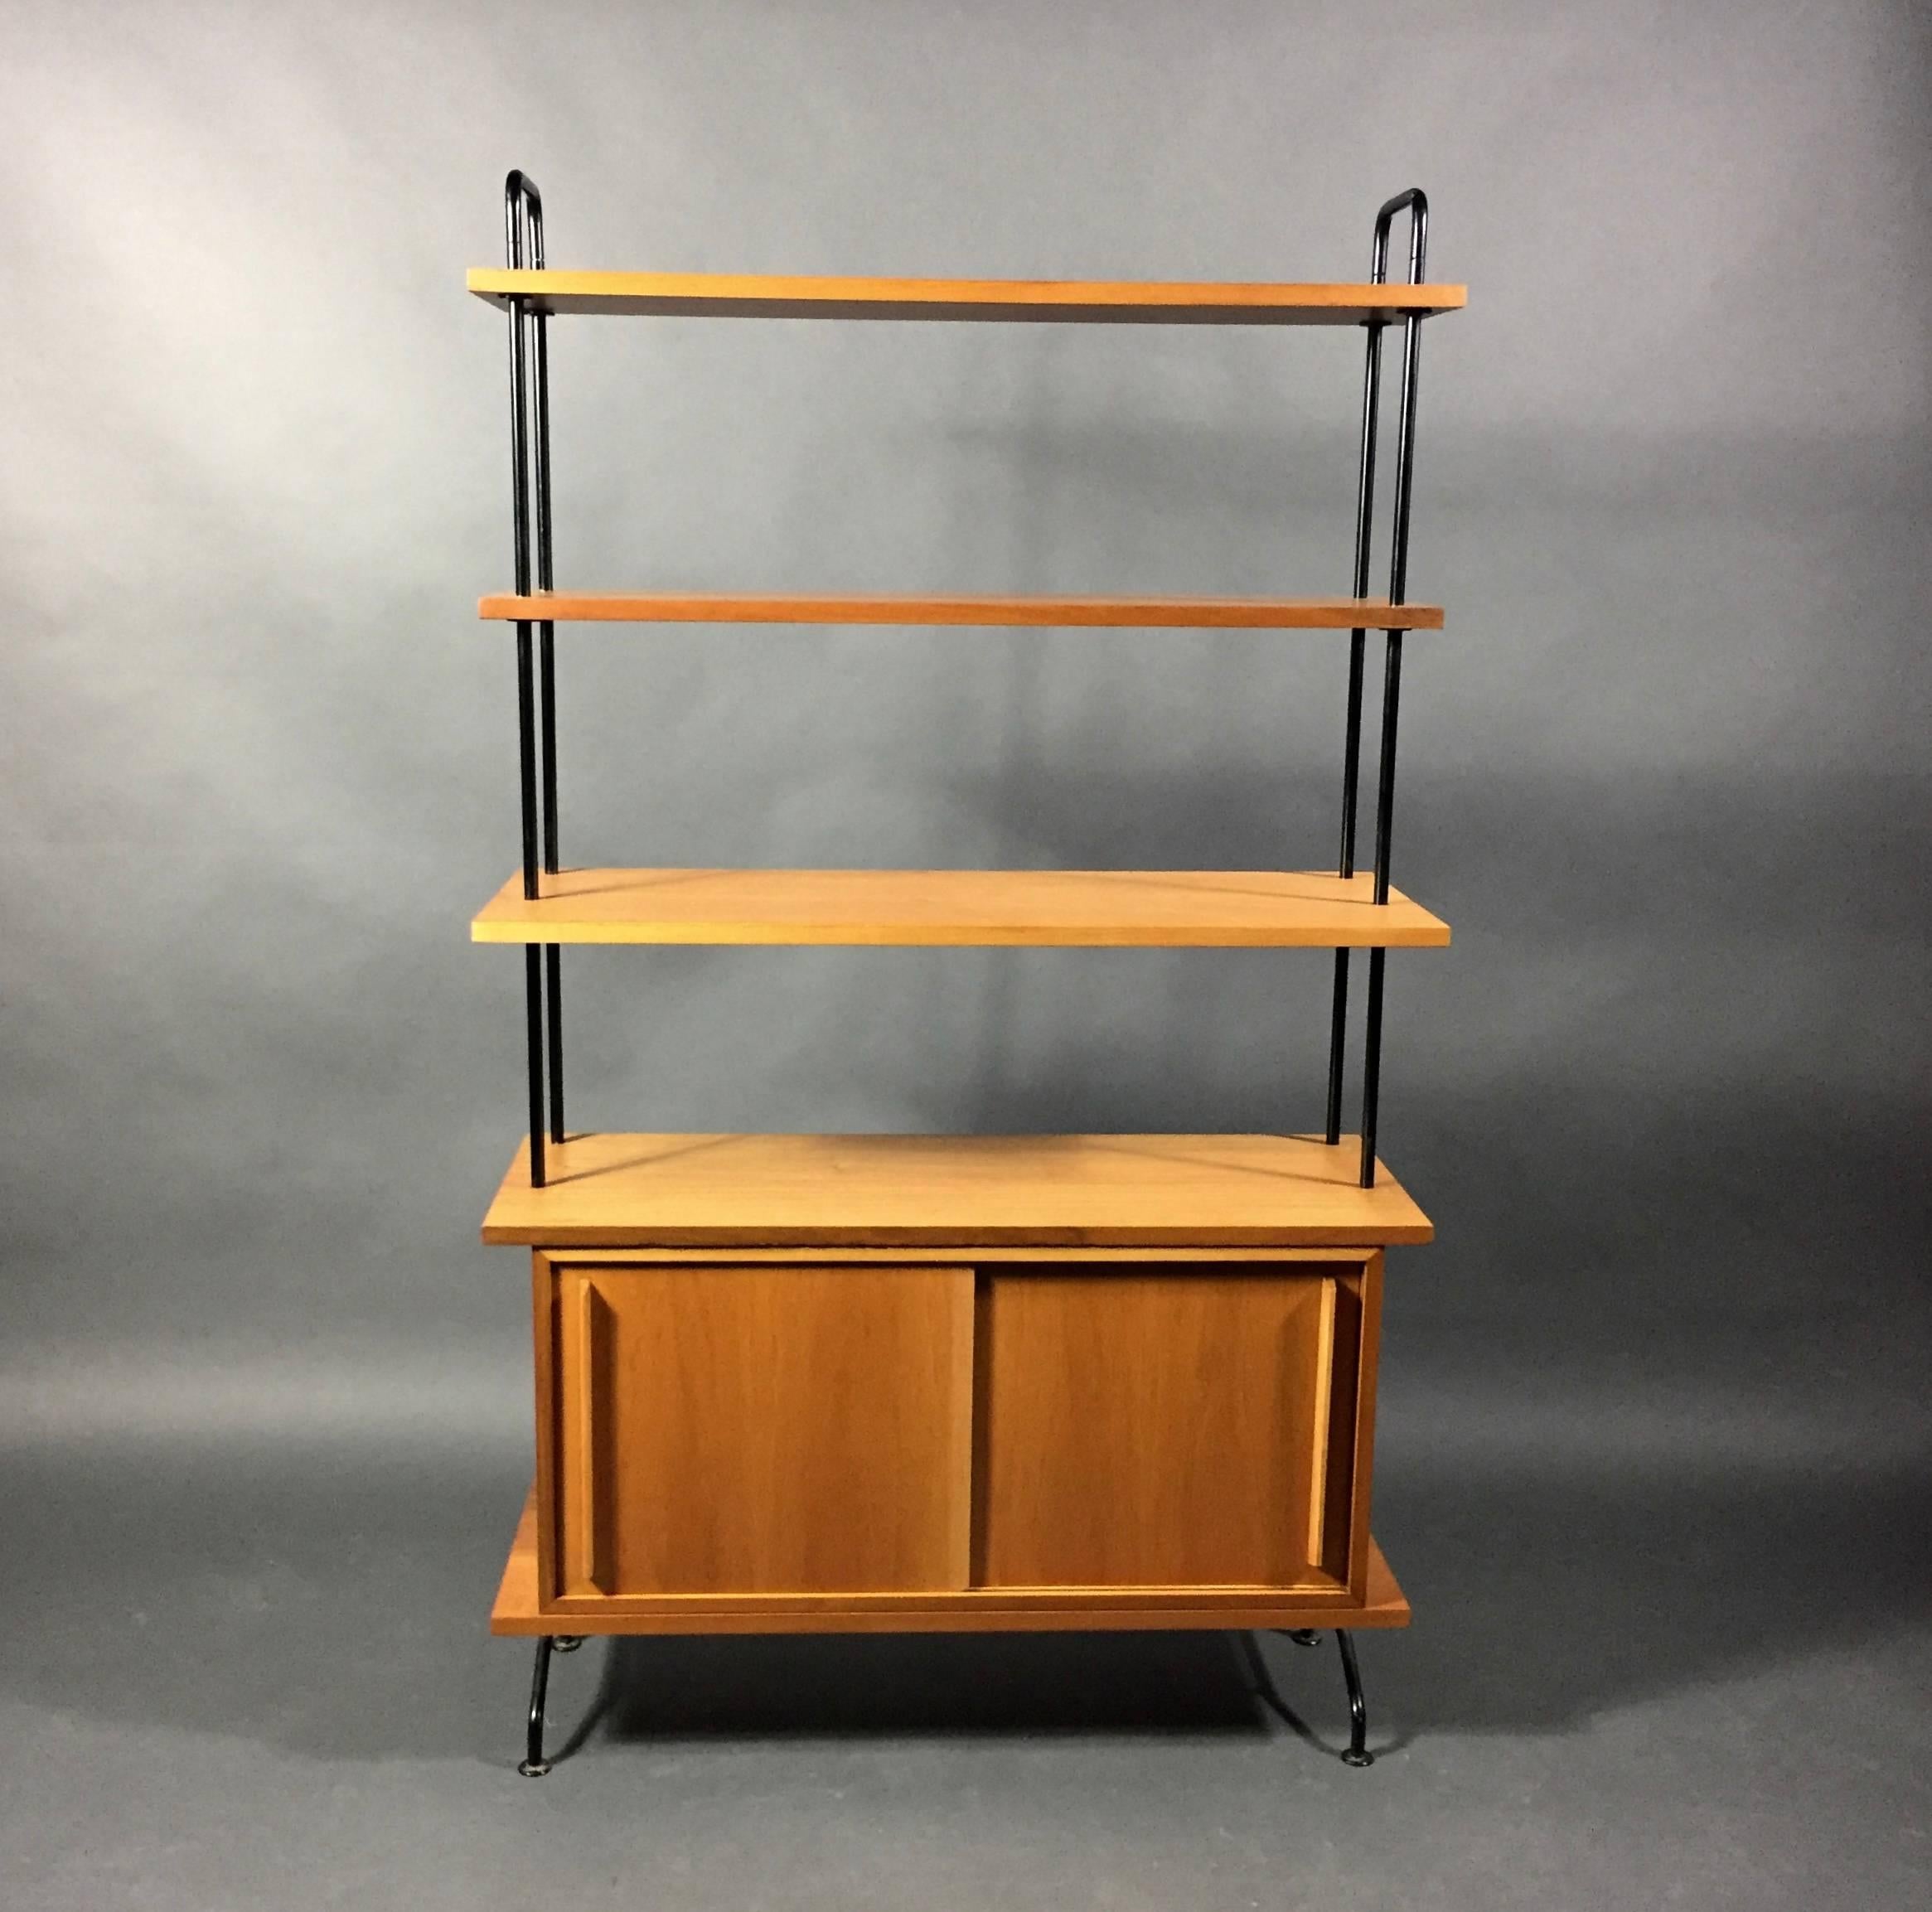 A perfect apartment size freestanding book case at only 56